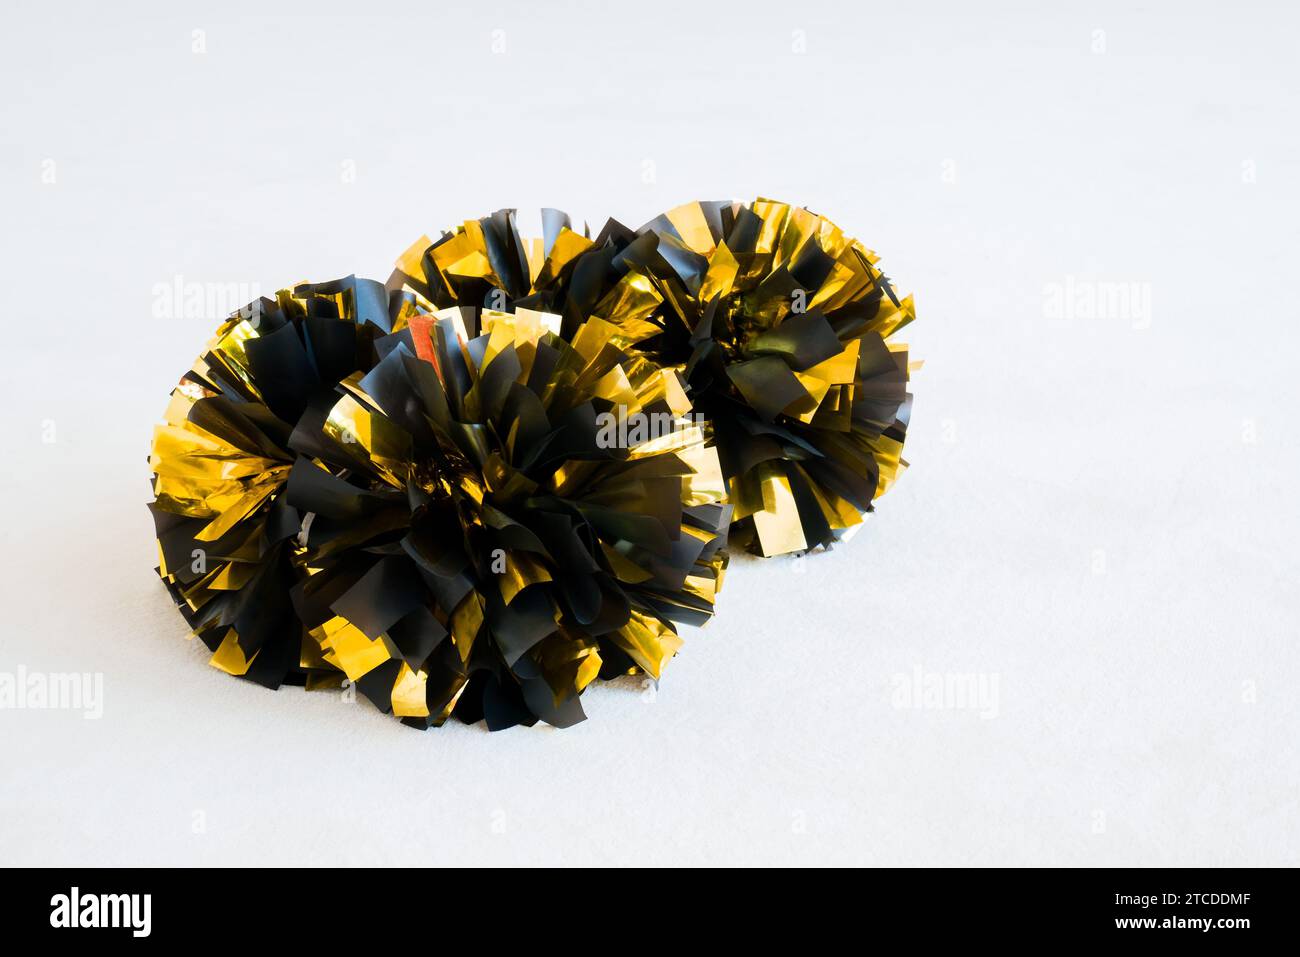 Gold and black cheerleading pom-poms on white practice mat. Background Stock Photo